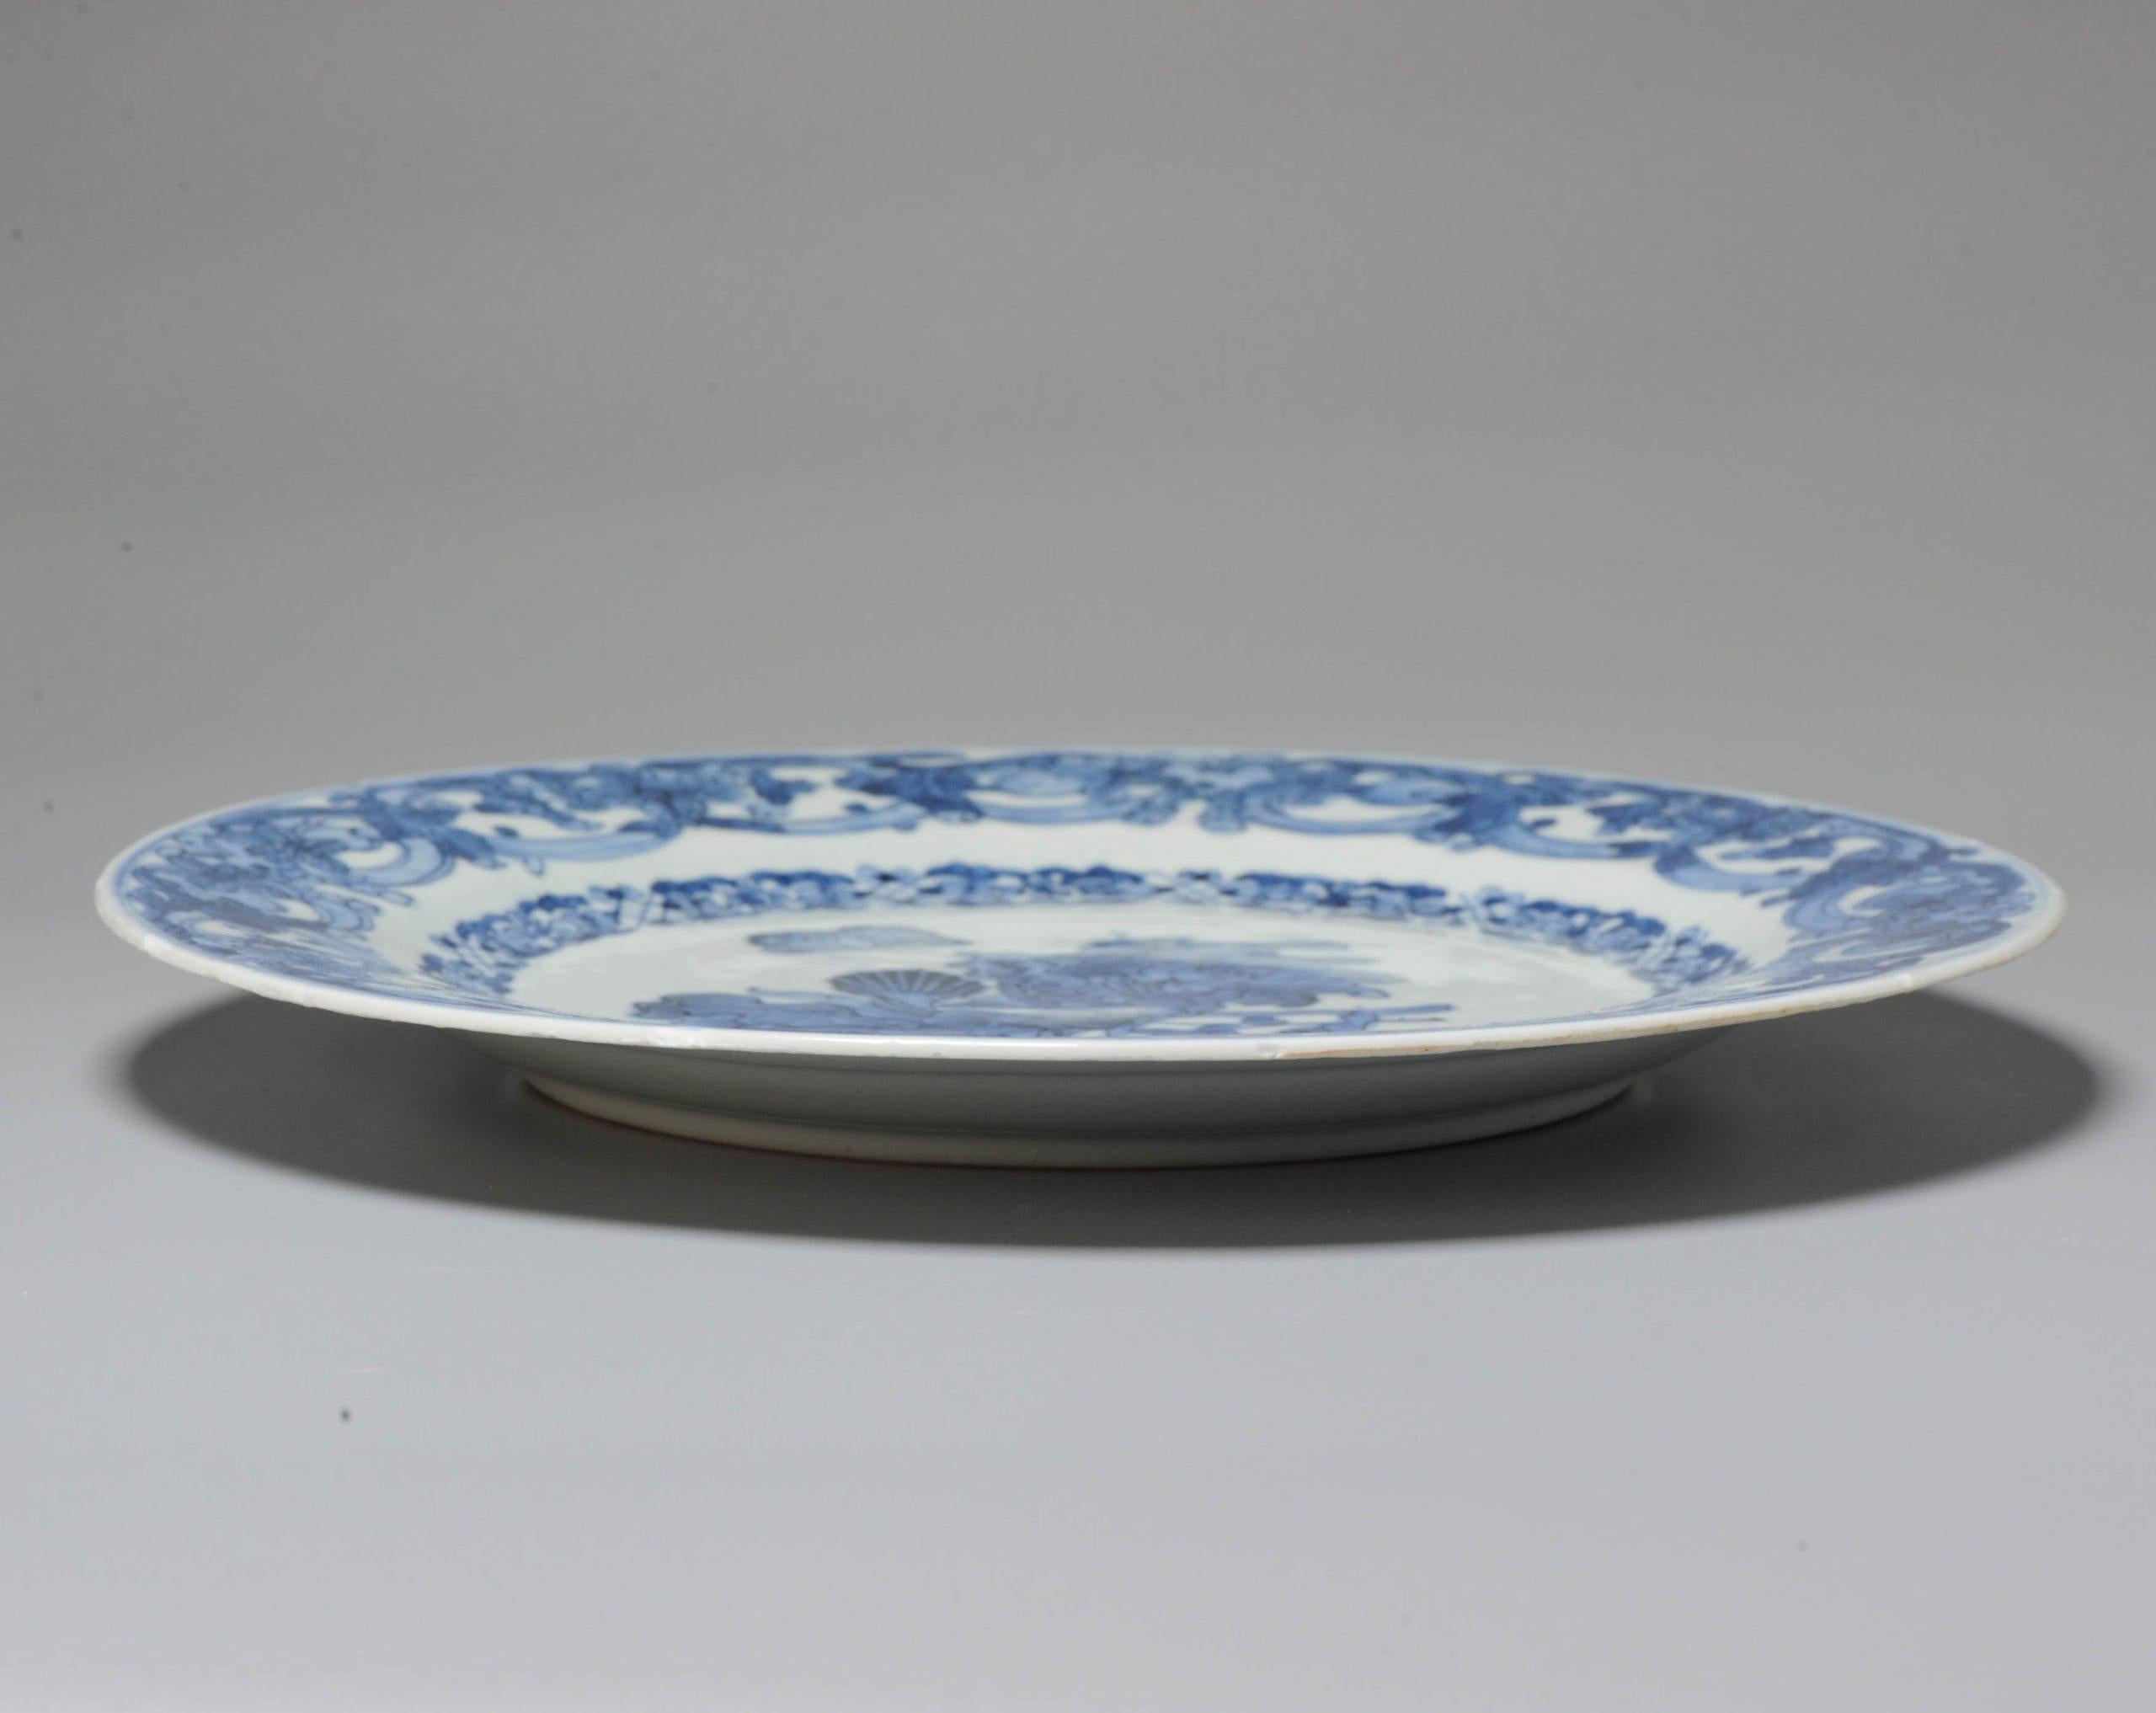 Larger dish on footring, flat rim. Decorated in underglaze blue with a butterfly and two flowers (iris and anemone). On the anemone, a large caterpillar. A second caterpillar is found on a lower leaf. The cavetto is encircled by a decorative border